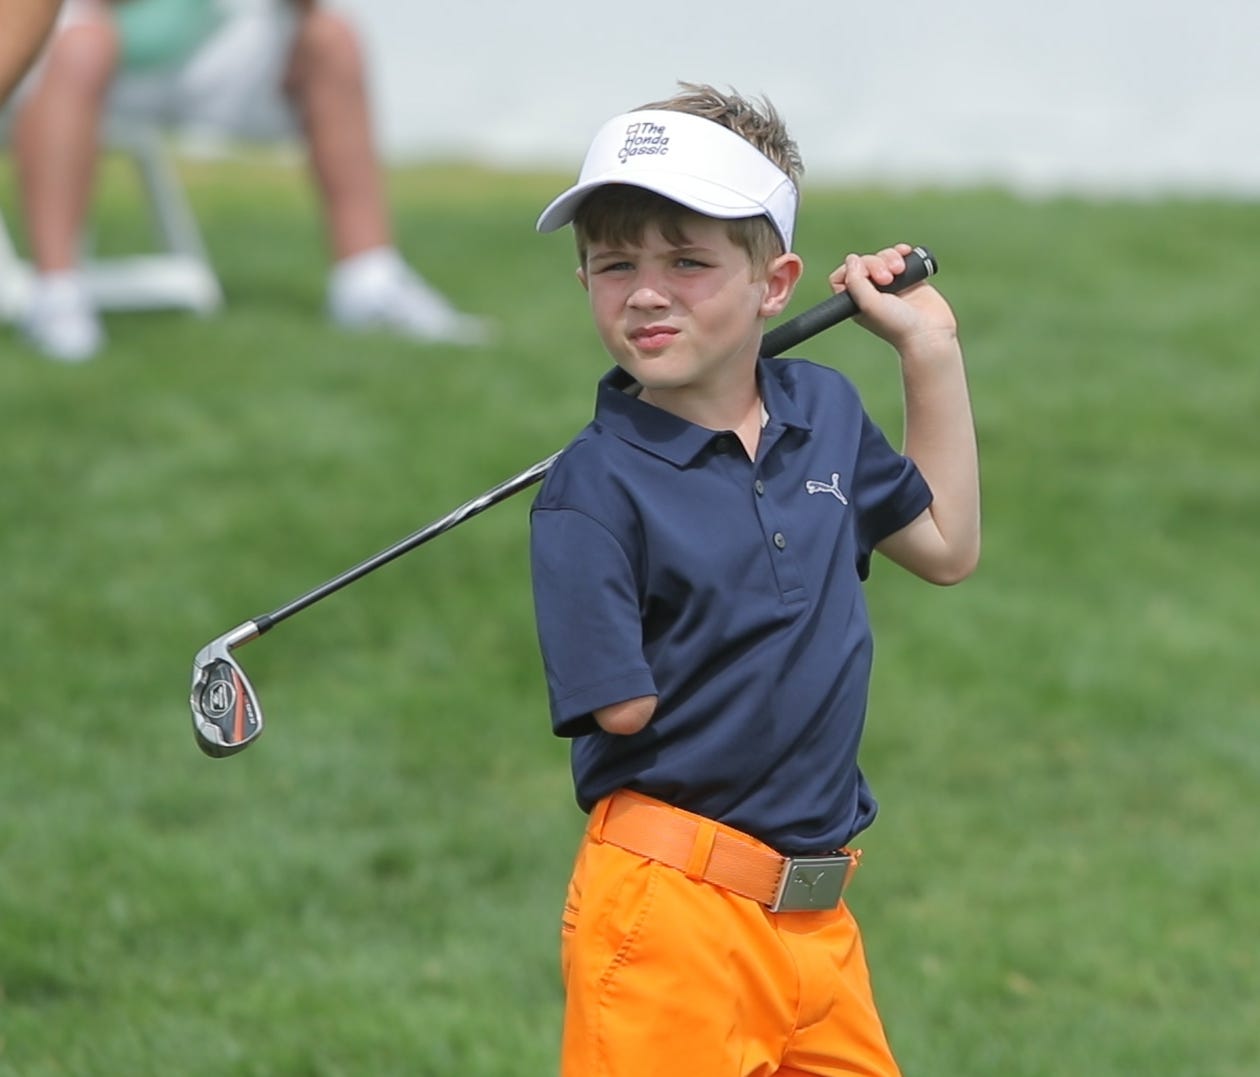 Tommy Morrissey, 6, took on the best players in the world from 60 yards short of the 18th green at PGA National Resort & Spa on Feb. 21.